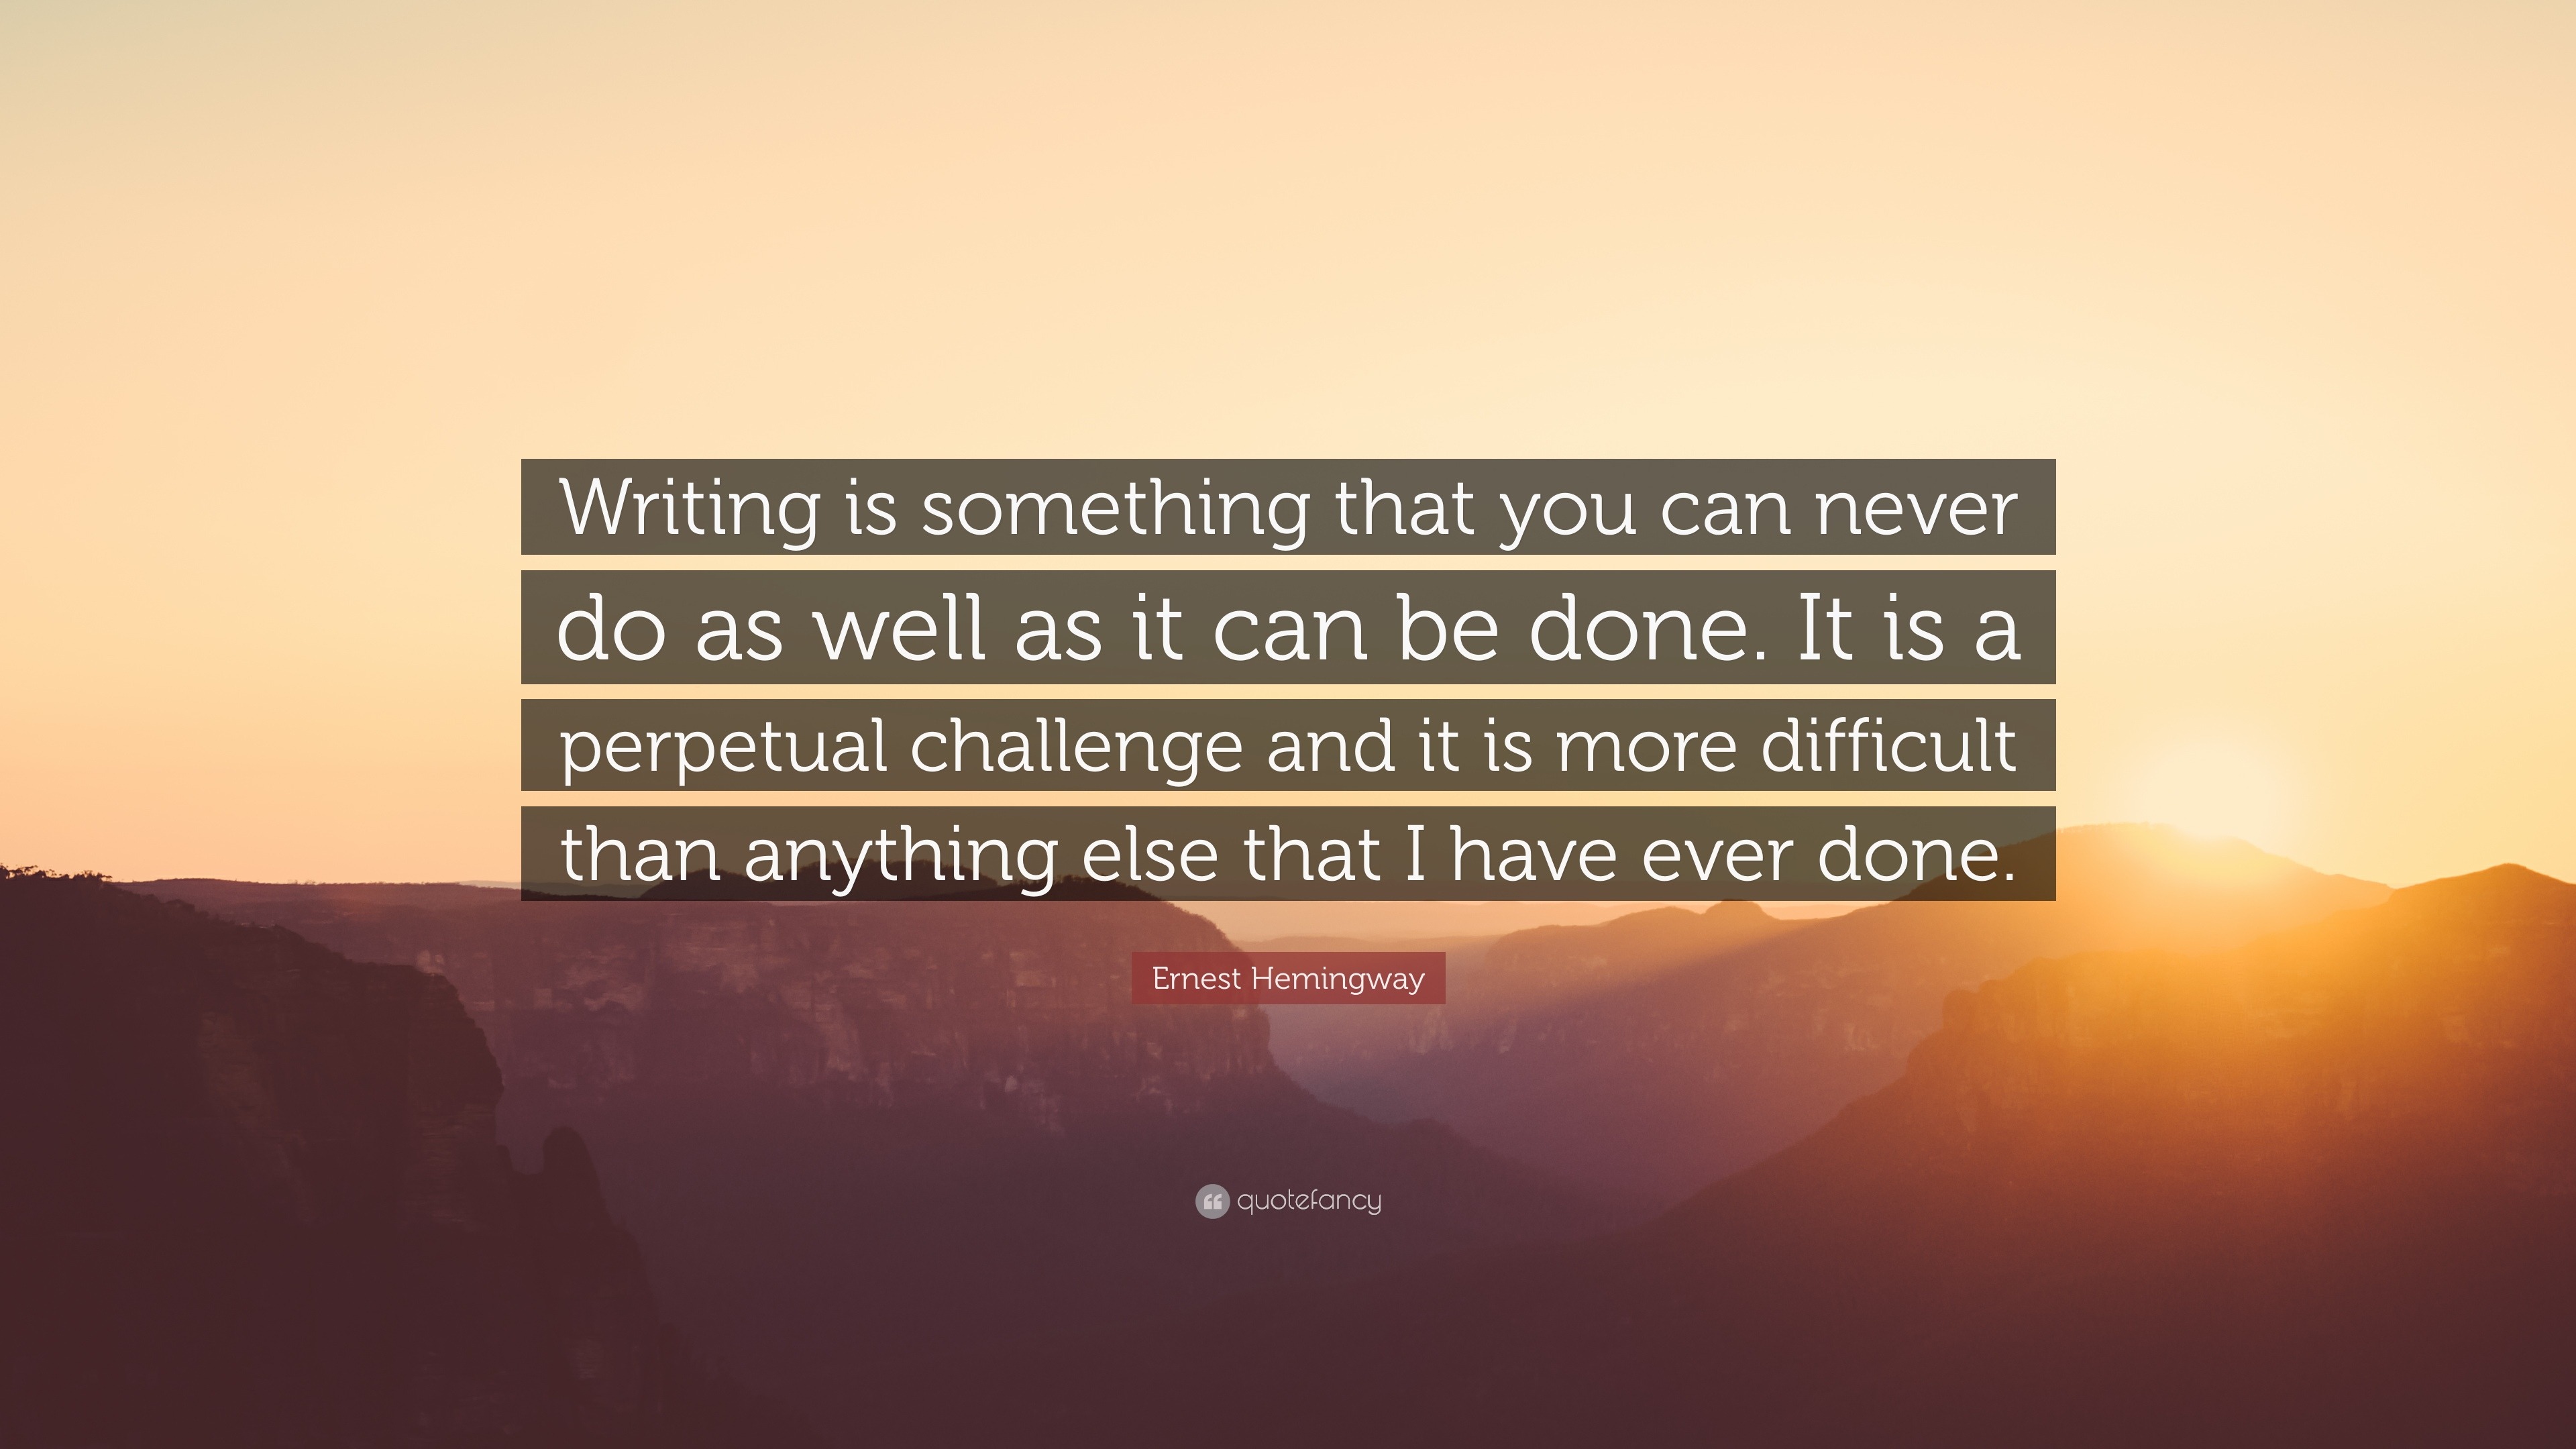 https://quotefancy.com/media/wallpaper/3840x2160/91106-Ernest-Hemingway-Quote-Writing-is-something-that-you-can-never-do.jpg